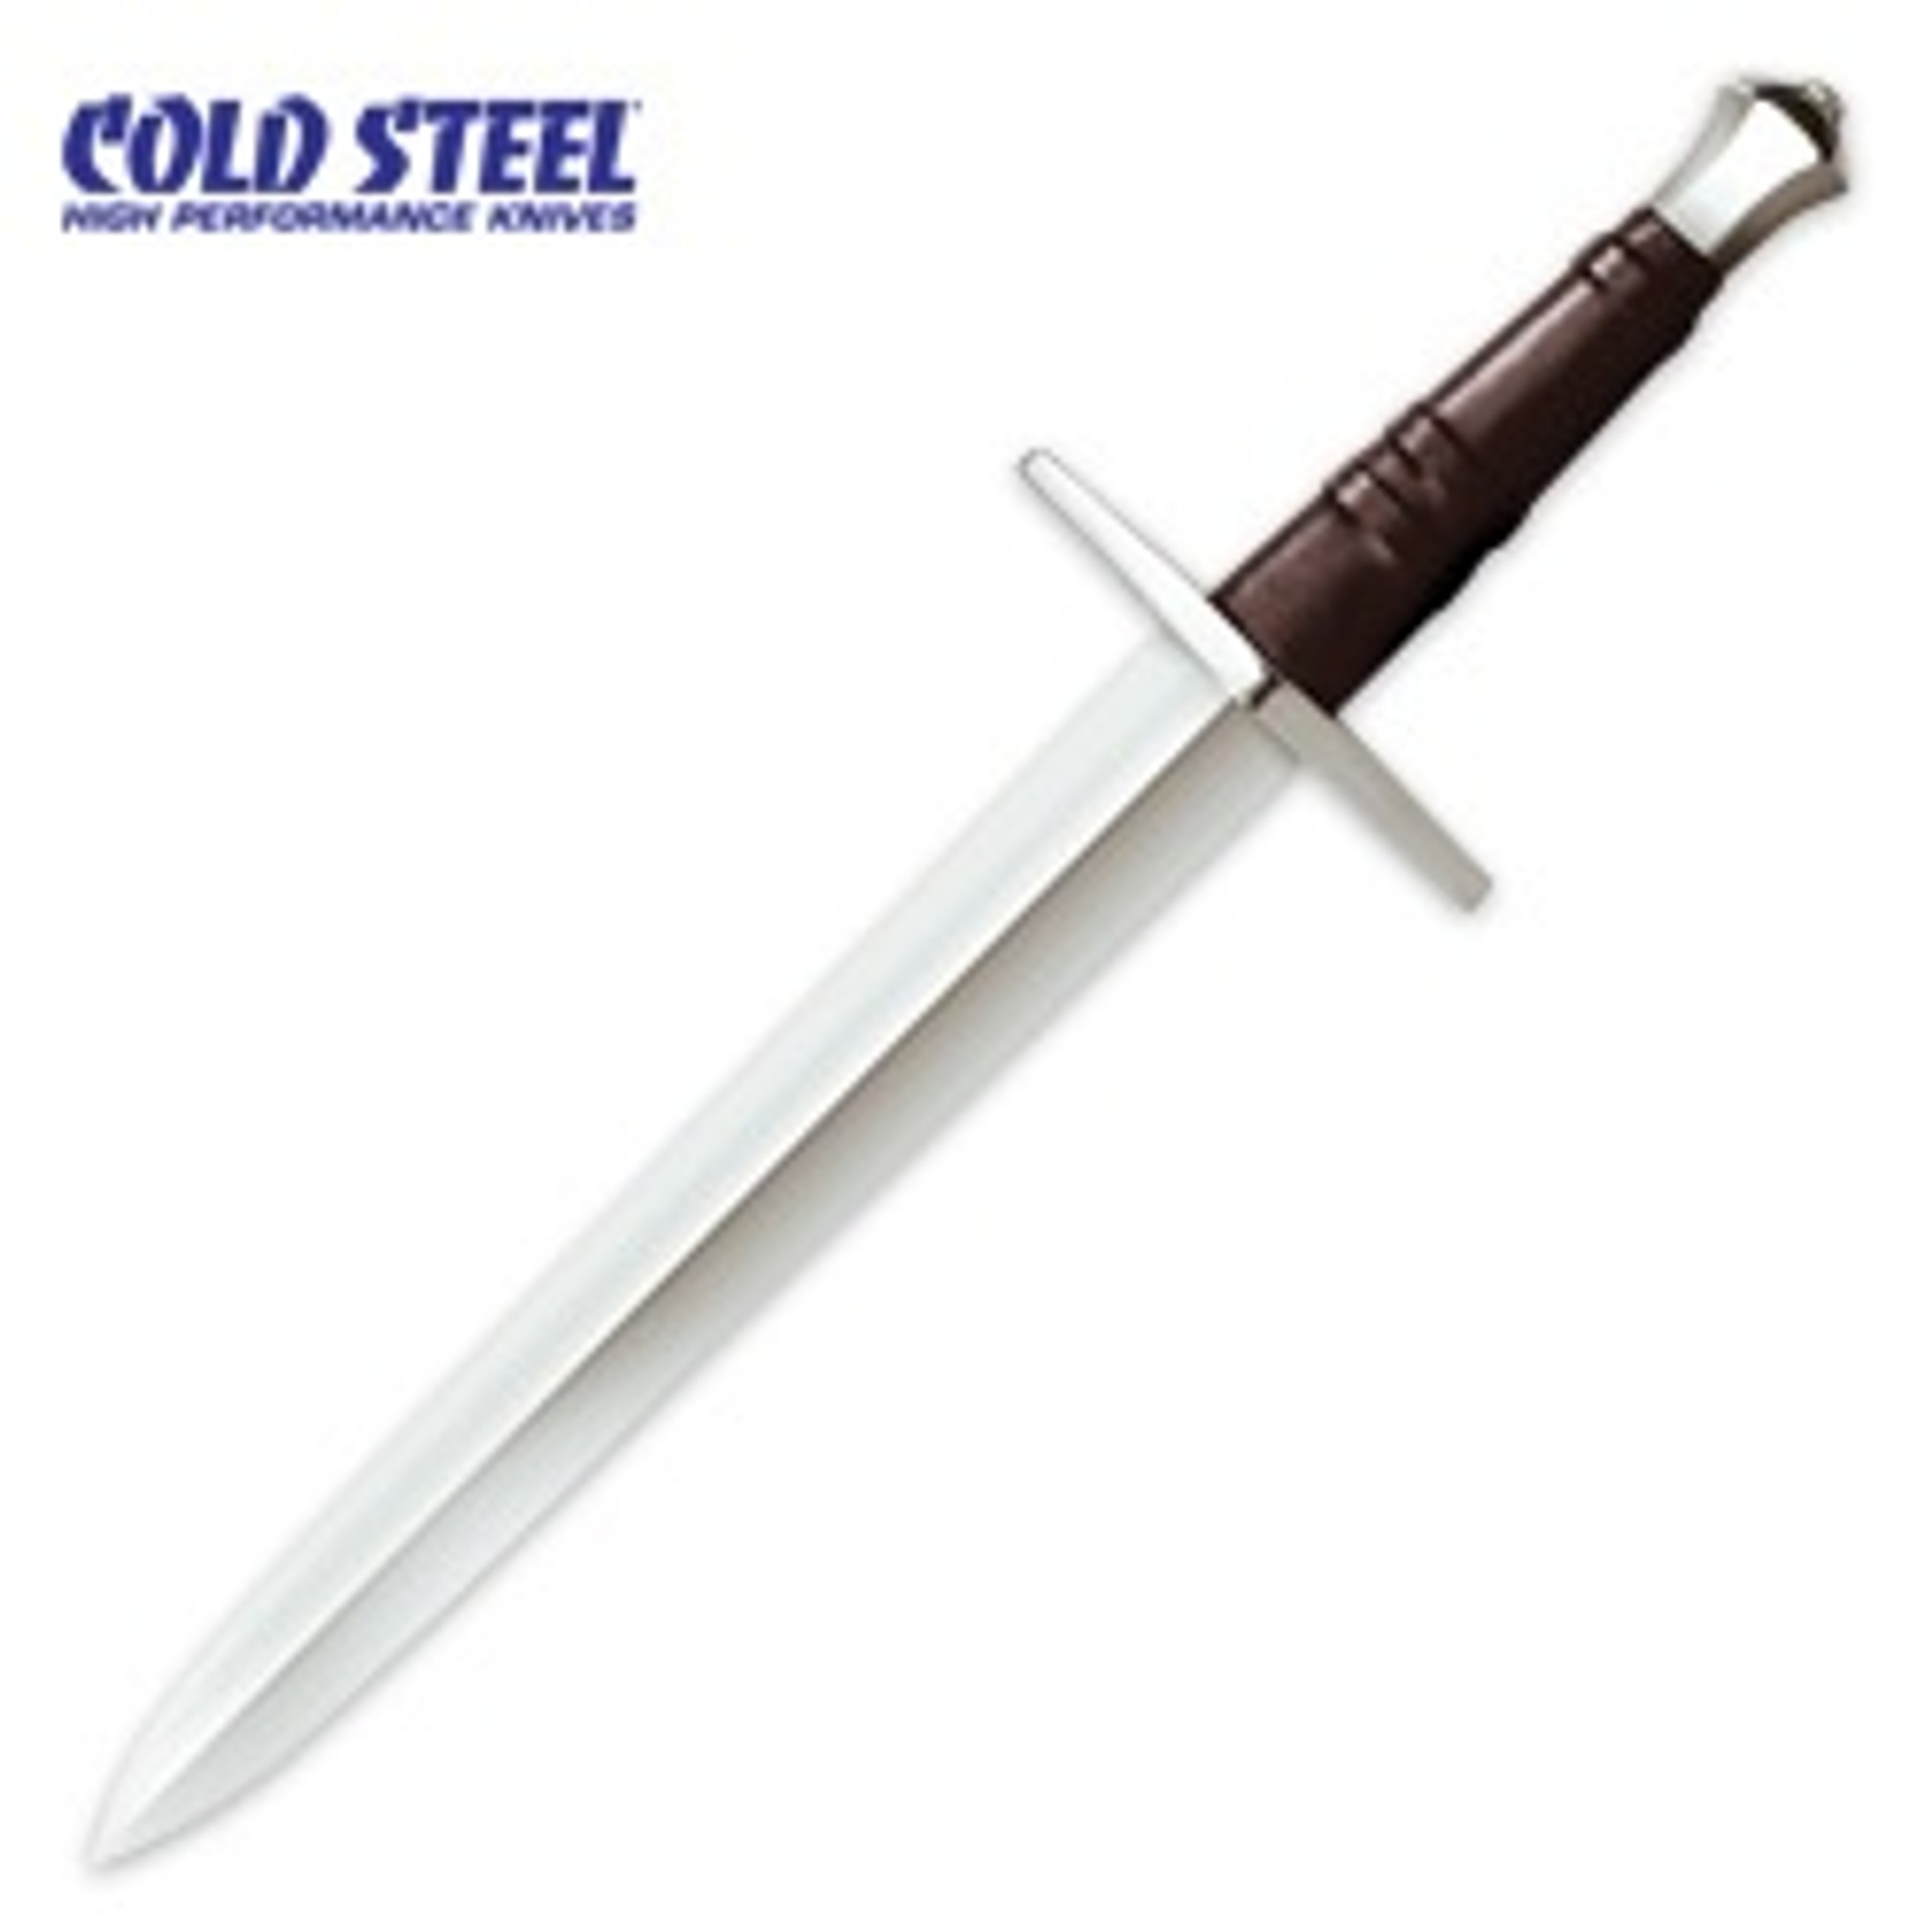 Cold Steel Hand-And-A-Half Dagger Knife